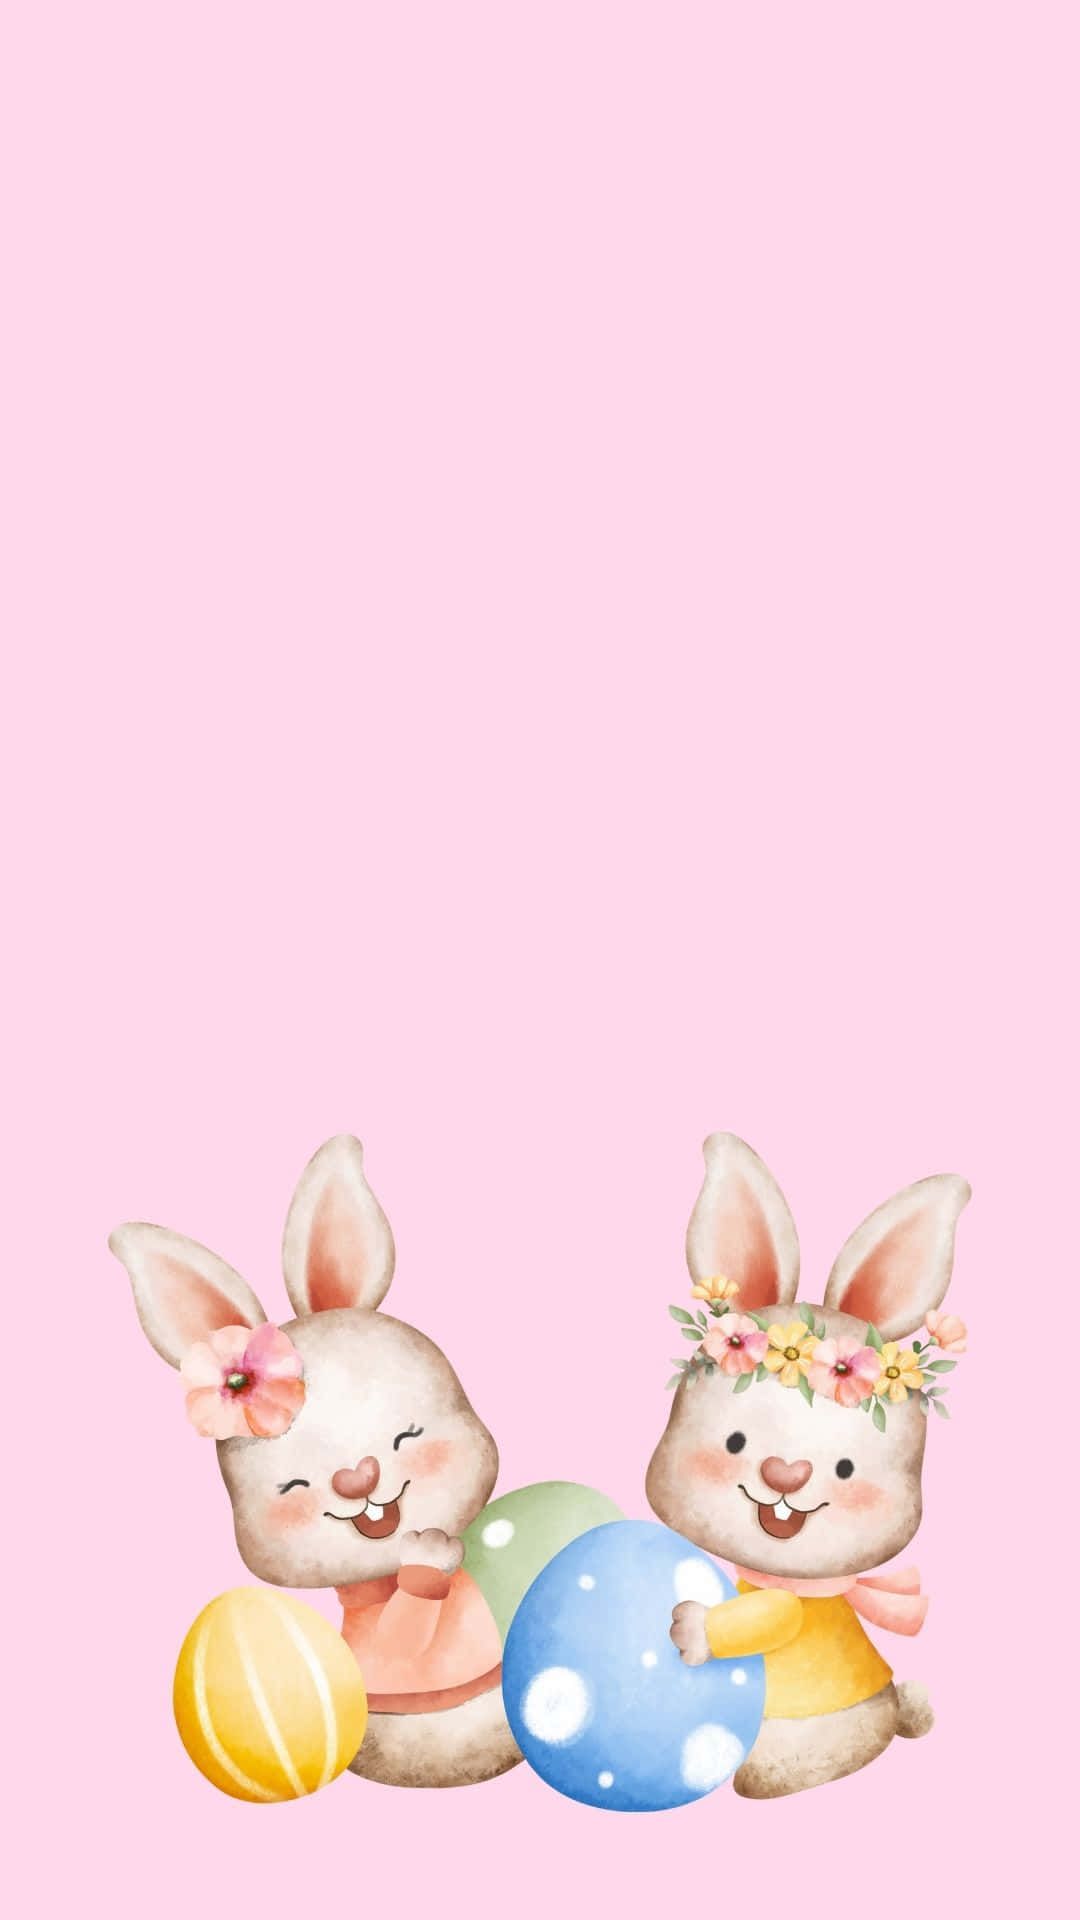 Celebrate Easter with the Easter Bunny! Wallpaper